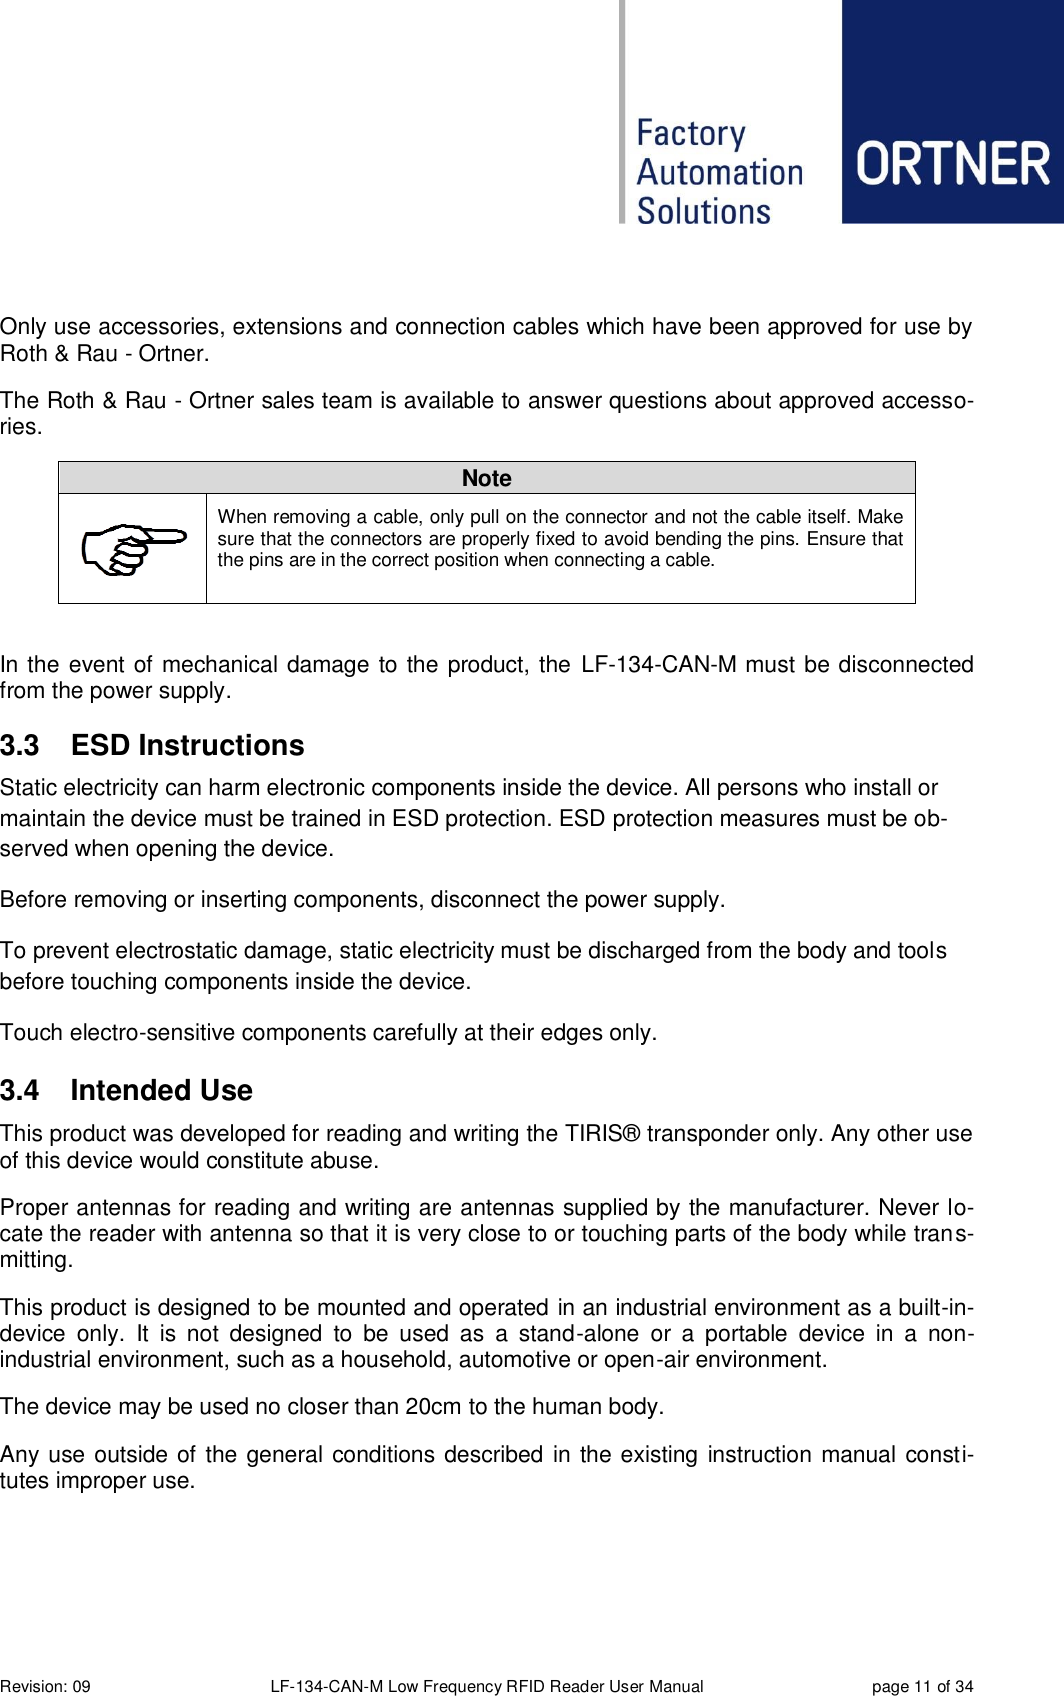  Revision: 09 LF-134-CAN-M Low Frequency RFID Reader User Manual  page 11 of 34  Only use accessories, extensions and connection cables which have been approved for use by Roth &amp; Rau - Ortner.   The Roth &amp; Rau - Ortner sales team is available to answer questions about approved accesso-ries. Note  When removing a cable, only pull on the connector and not the cable itself. Make sure that the connectors are properly fixed to avoid bending the pins. Ensure that the pins are in the correct position when connecting a cable.  In the event of mechanical damage to the product, the  LF-134-CAN-M must be disconnected from the power supply.  3.3  ESD Instructions Static electricity can harm electronic components inside the device. All persons who install or maintain the device must be trained in ESD protection. ESD protection measures must be ob-served when opening the device. Before removing or inserting components, disconnect the power supply. To prevent electrostatic damage, static electricity must be discharged from the body and tools before touching components inside the device. Touch electro-sensitive components carefully at their edges only. 3.4  Intended Use This product was developed for reading and writing the TIRIS® transponder only. Any other use of this device would constitute abuse.  Proper antennas for reading and writing are antennas supplied by the manufacturer. Never lo-cate the reader with antenna so that it is very close to or touching parts of the body while trans-mitting.  This product is designed to be mounted and operated in an industrial environment as a built-in-device  only.  It  is  not  designed  to  be  used  as  a  stand-alone  or  a  portable  device  in  a  non-industrial environment, such as a household, automotive or open-air environment. The device may be used no closer than 20cm to the human body. Any use outside of the general conditions described in the existing instruction manual consti-tutes improper use.   